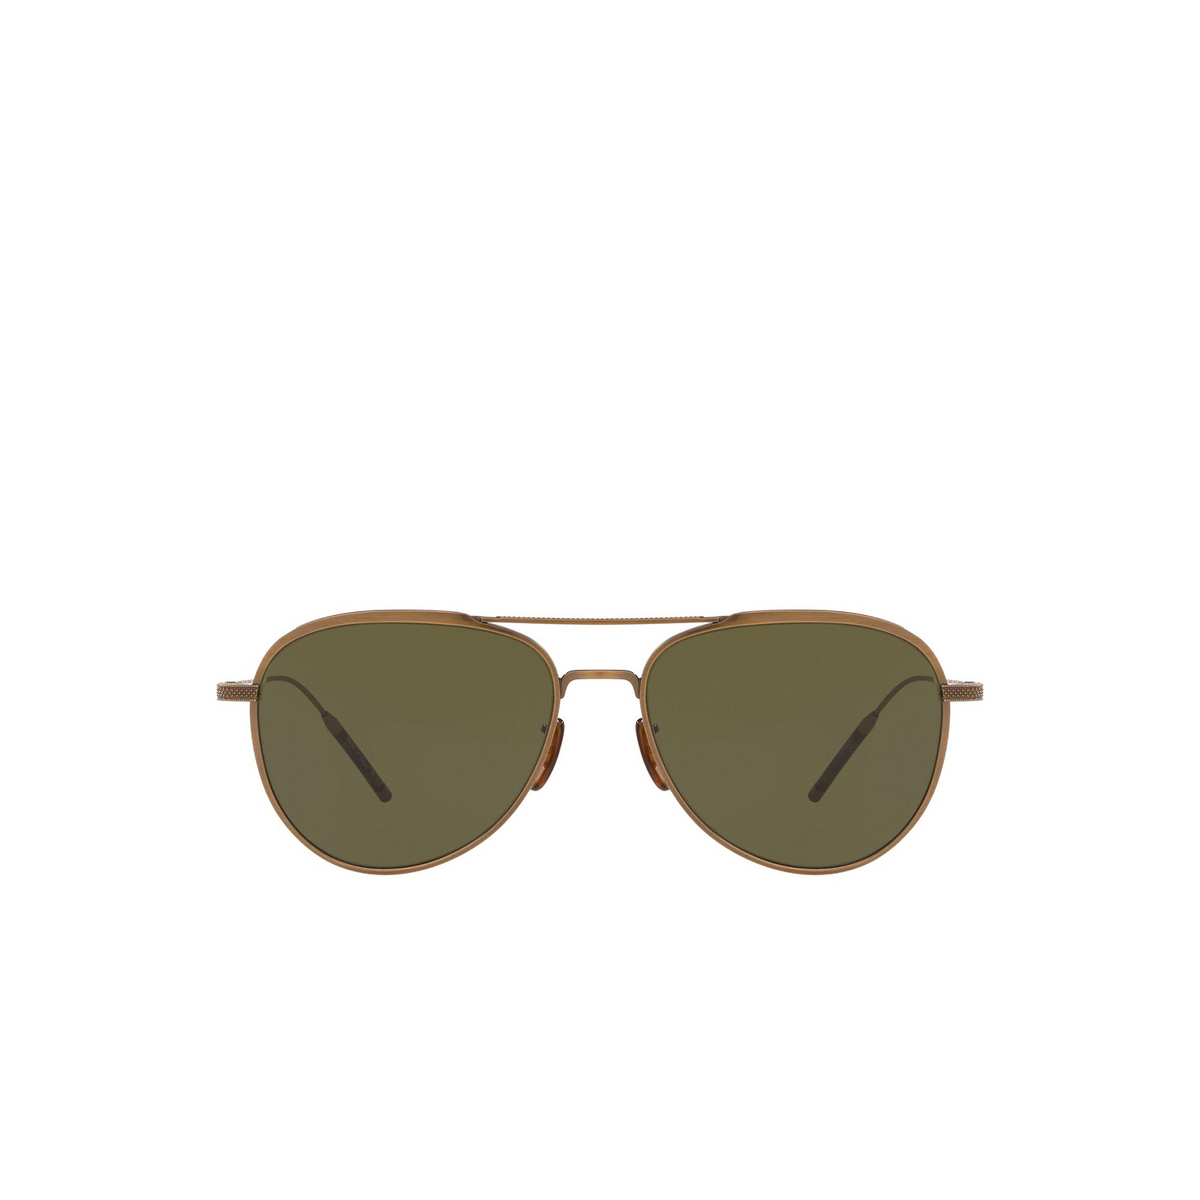 Oliver Peoples® Aviator Sunglasses: Tk-3 OV1276ST color Antique Gold 528452 - front view.